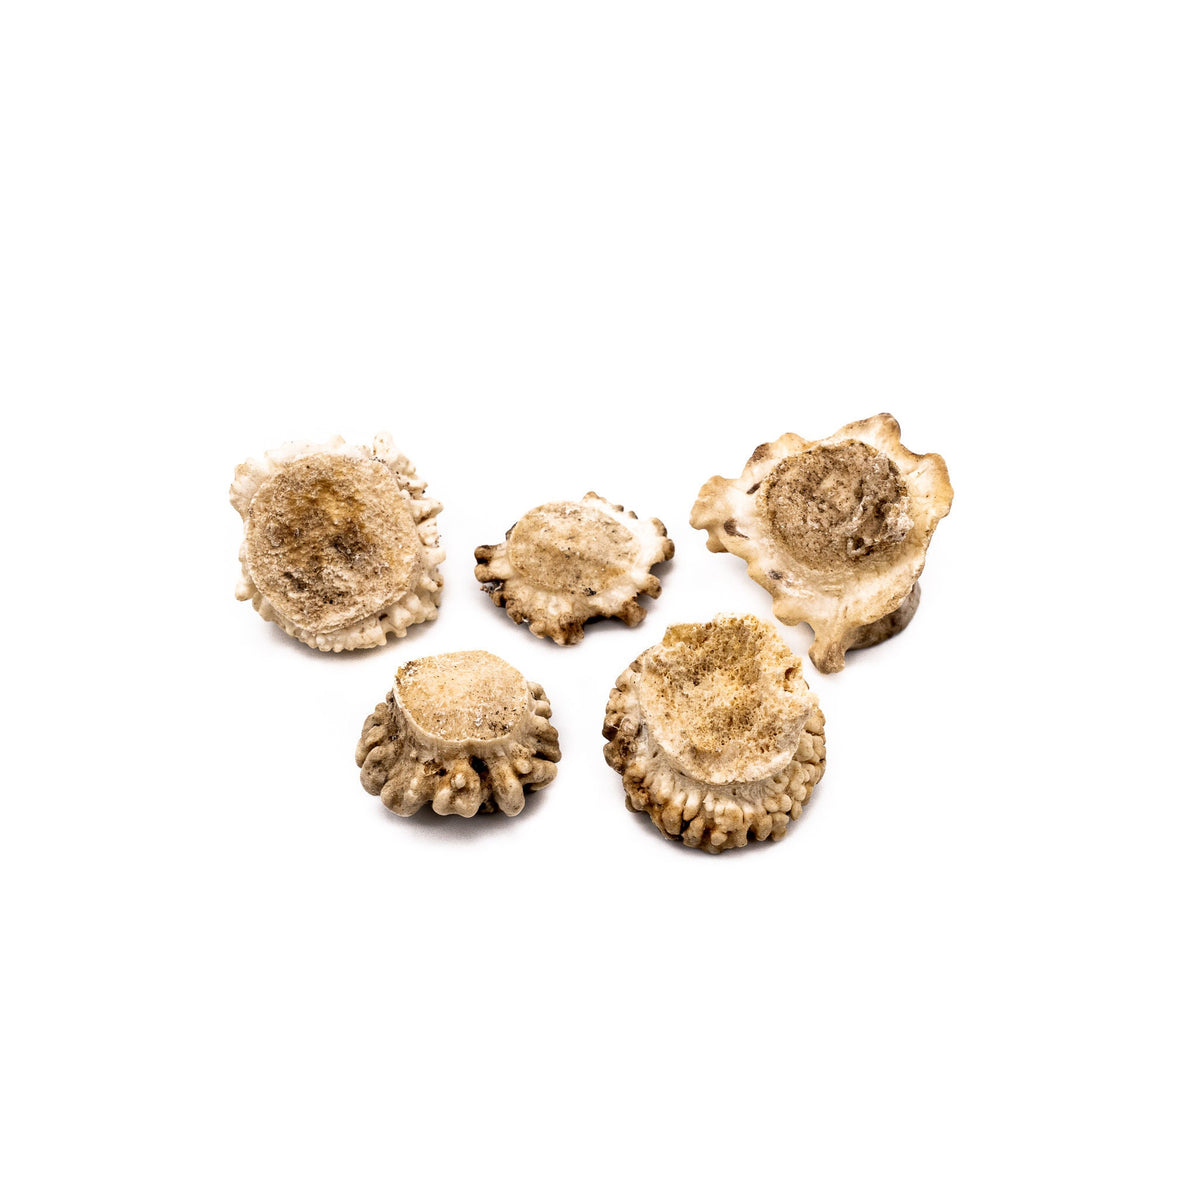 5 ct Small Deer Shed Antler Burrs for Craft